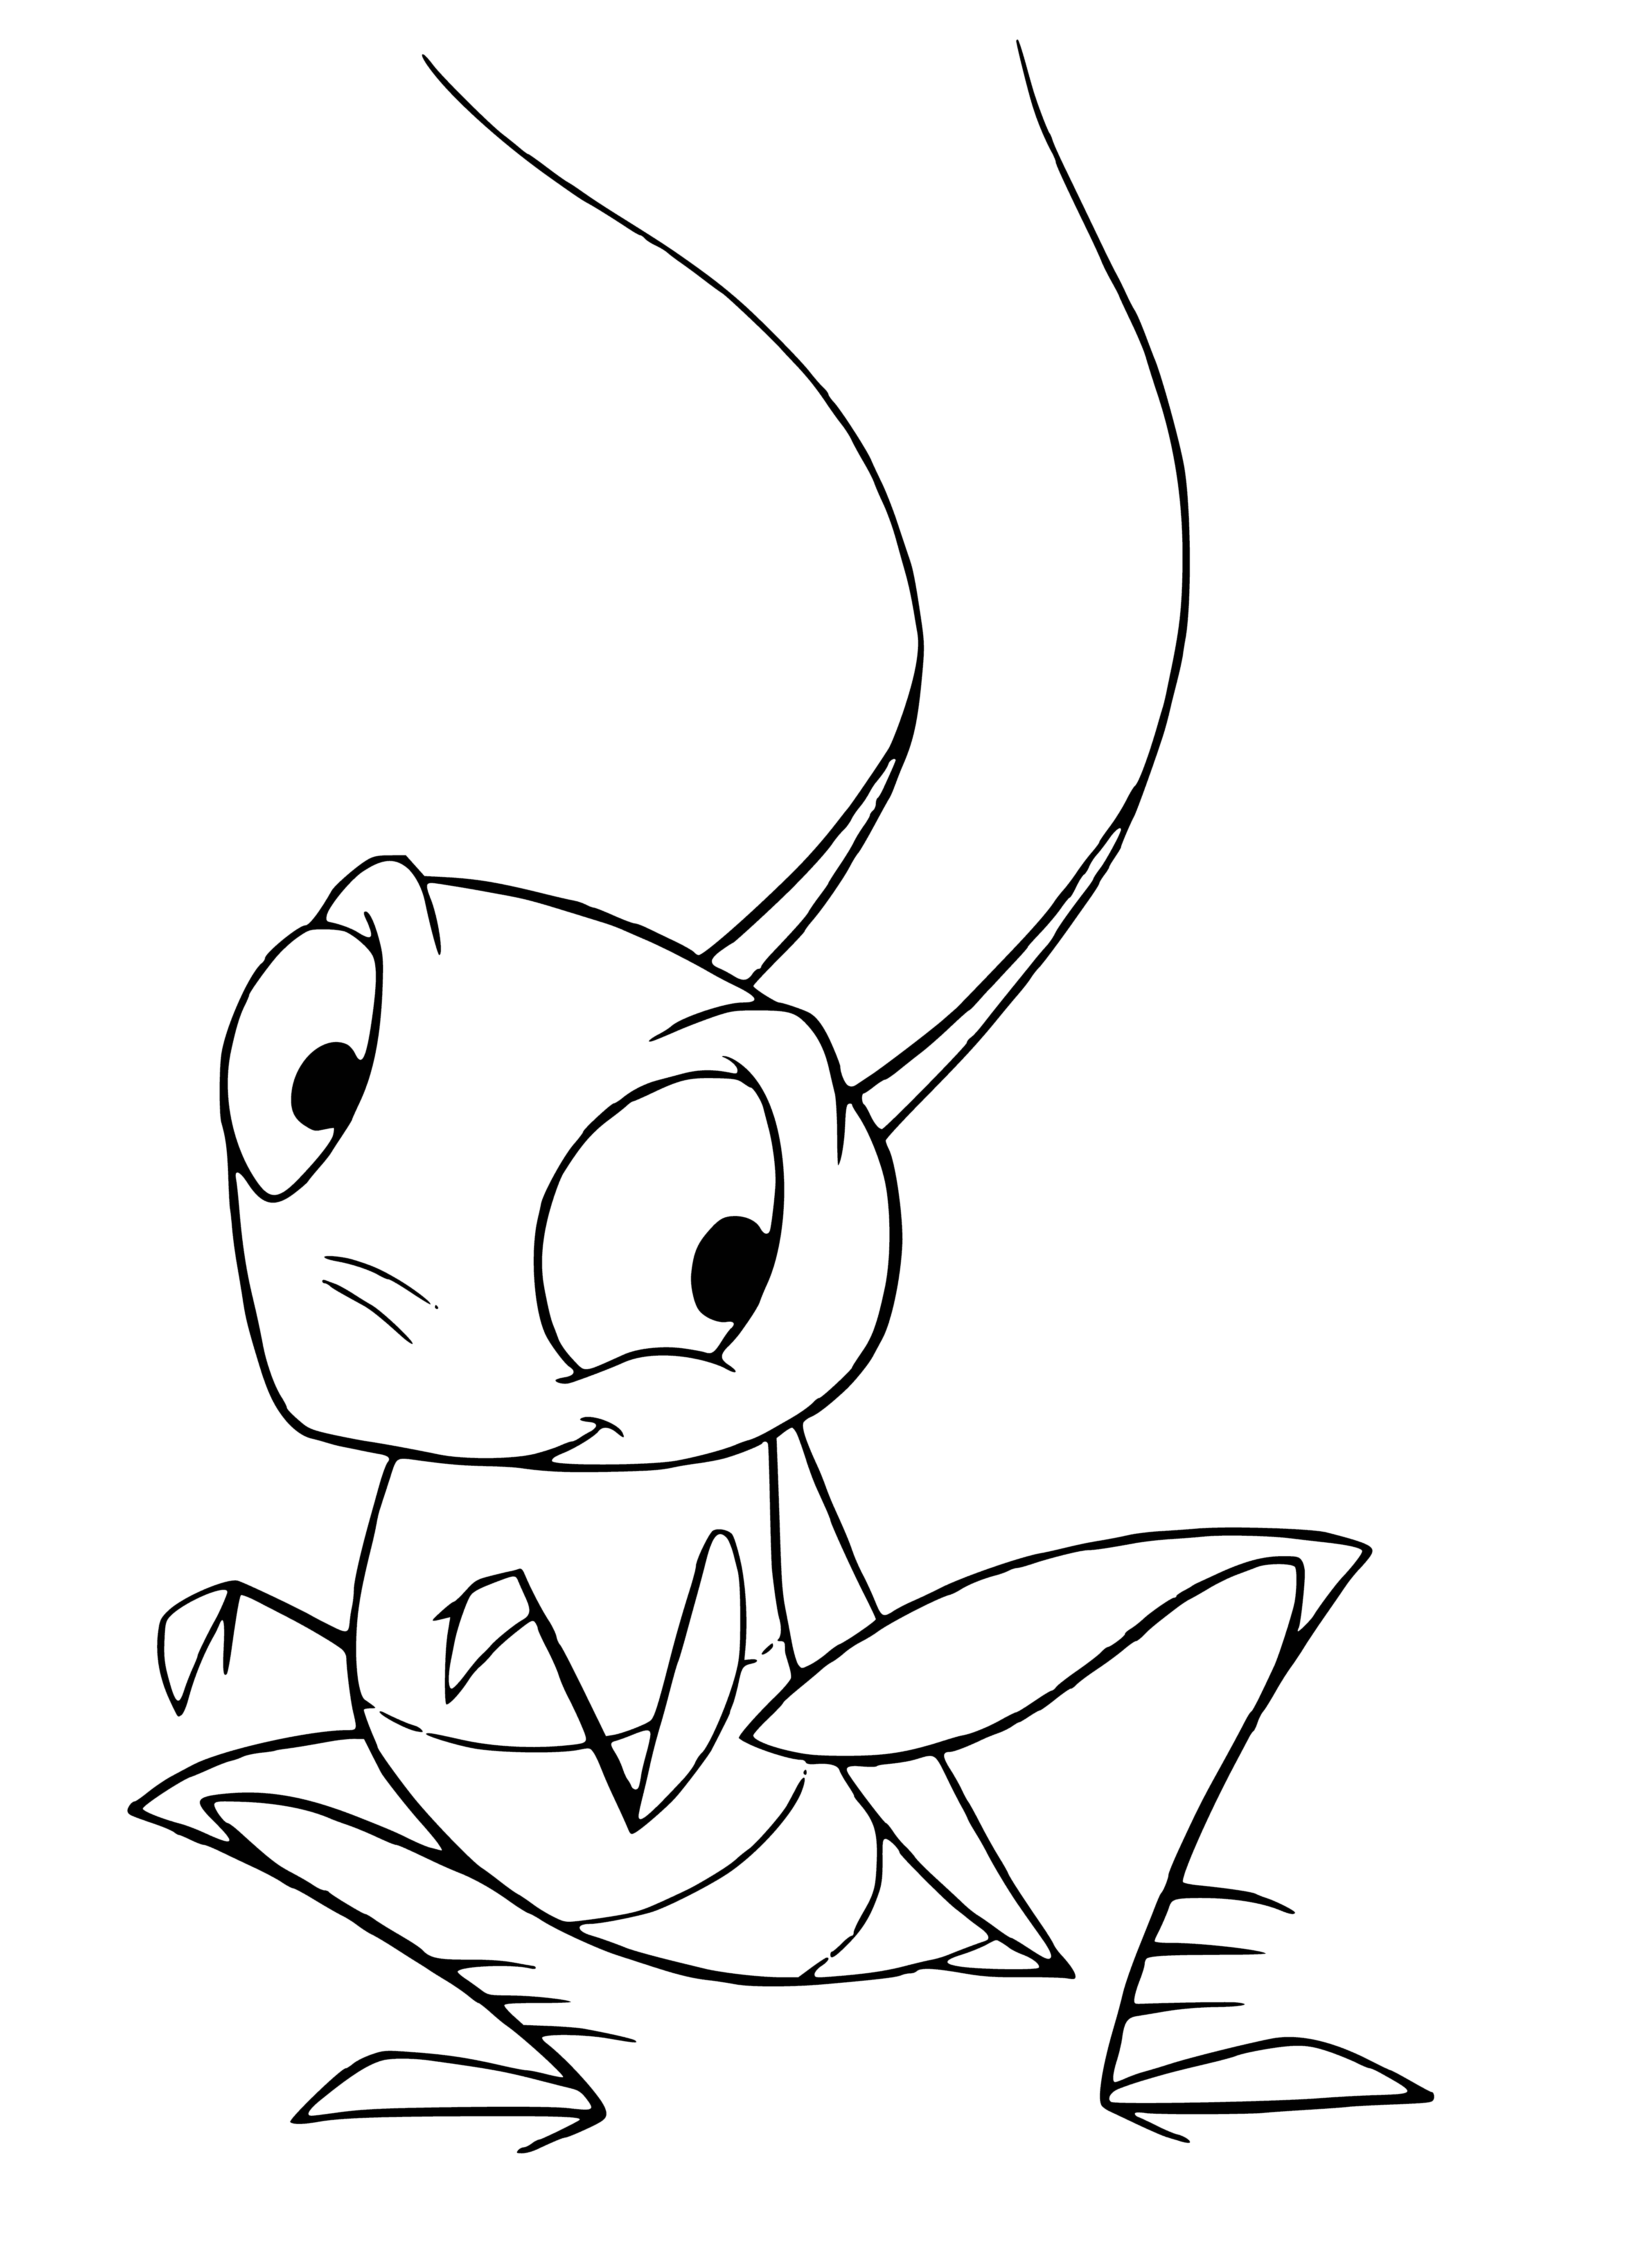 coloring page: Cree-Key Cricket: beautiful black & white, long wings & legs with striped abdomens.